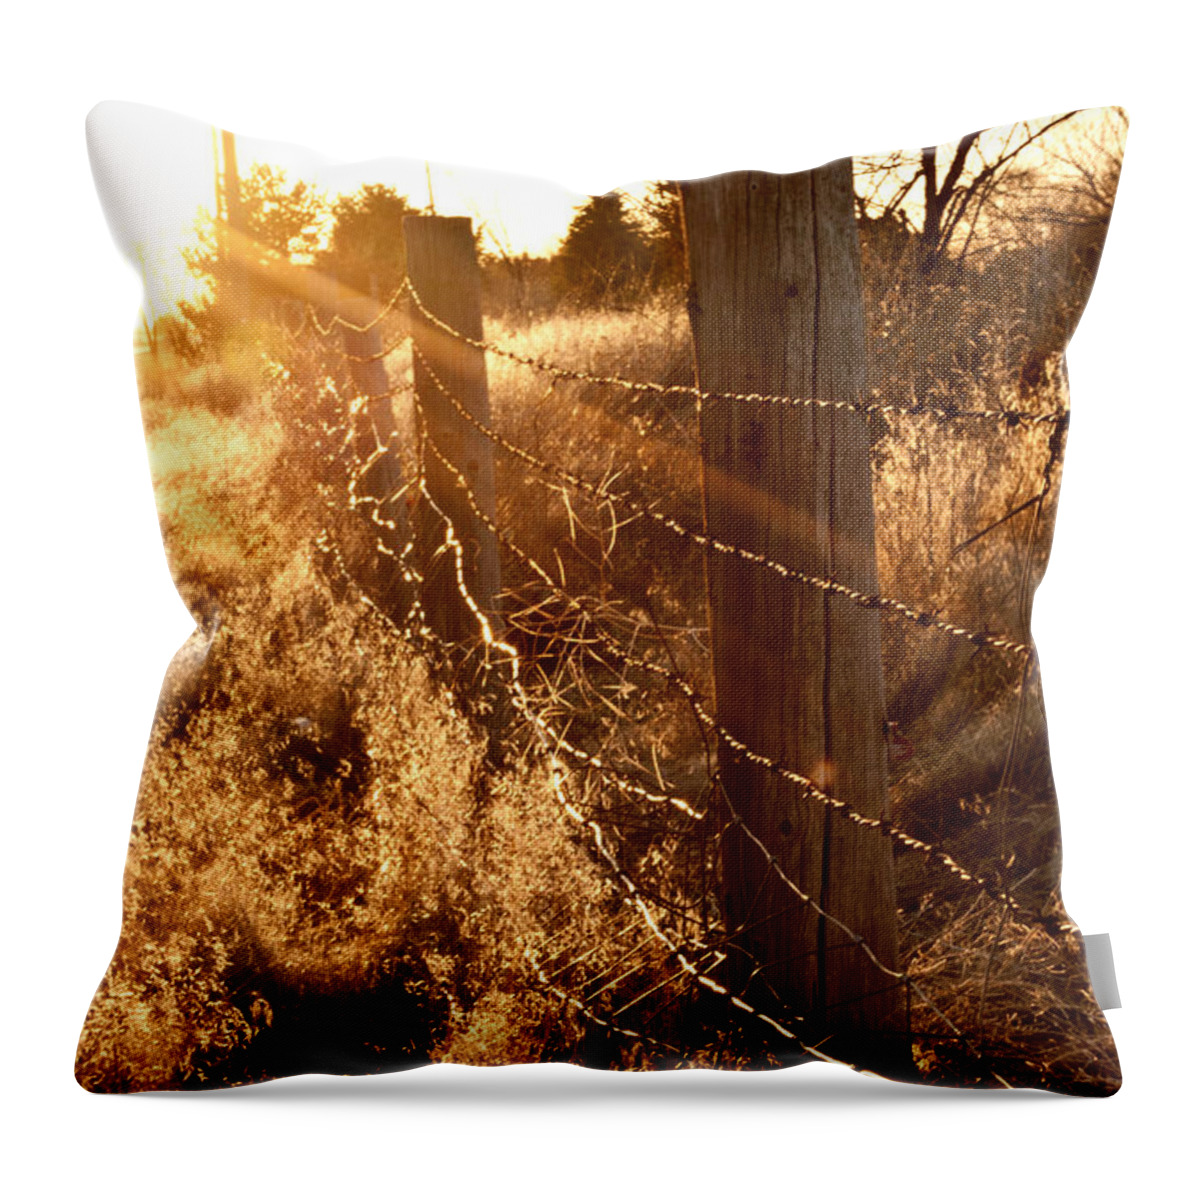 Old Fence Throw Pillow featuring the photograph His Light by Jessica Tookey